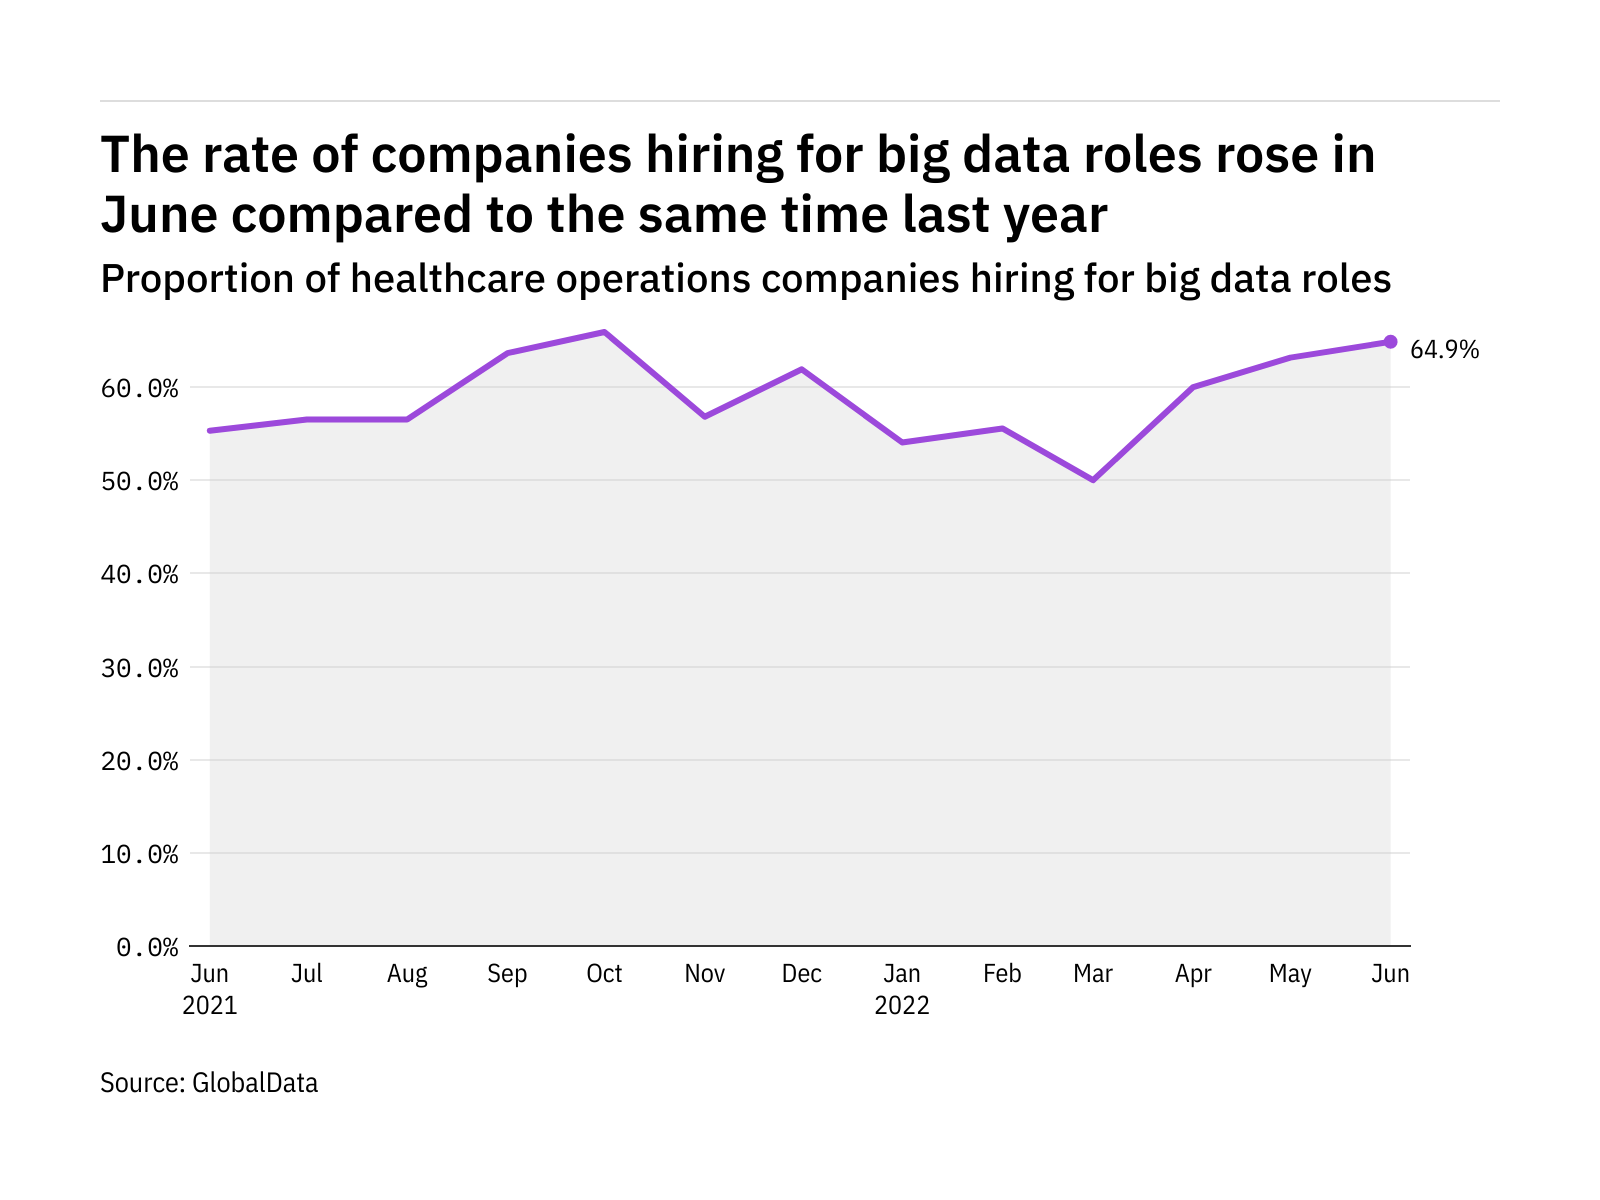 Big data hiring levels in the healthcare industry rose in June 2022